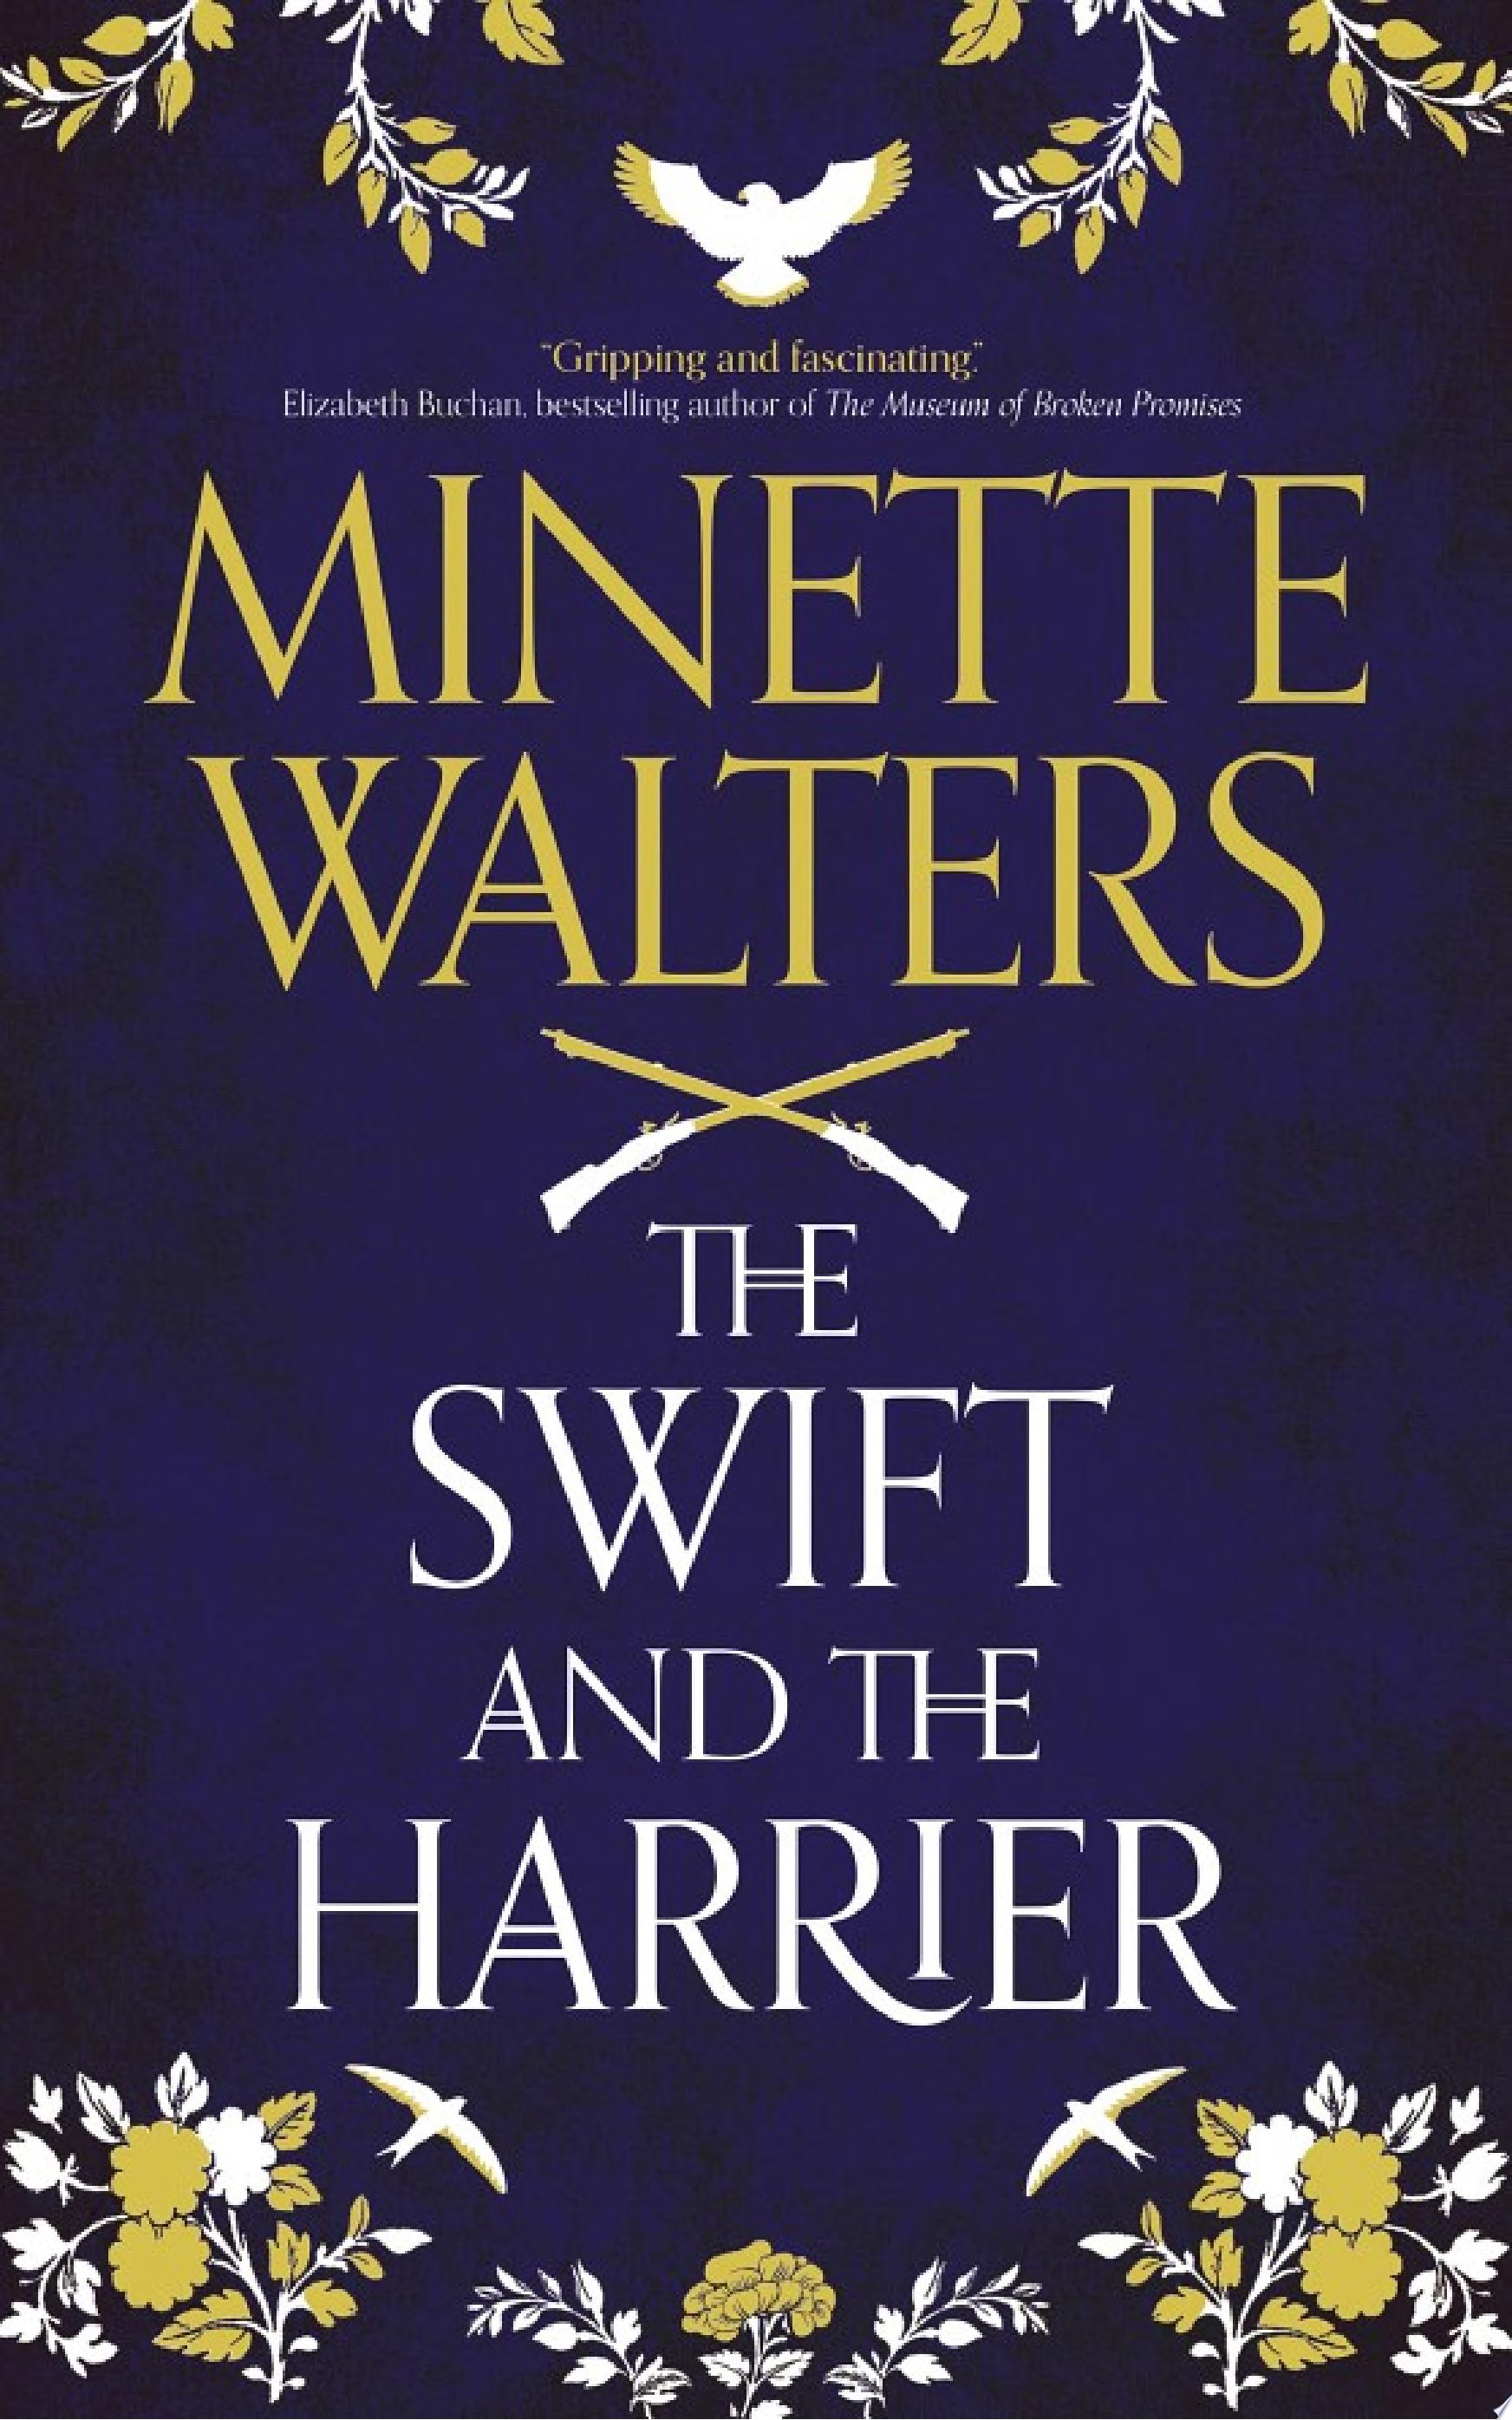 Image for "The Swift and the Harrier"